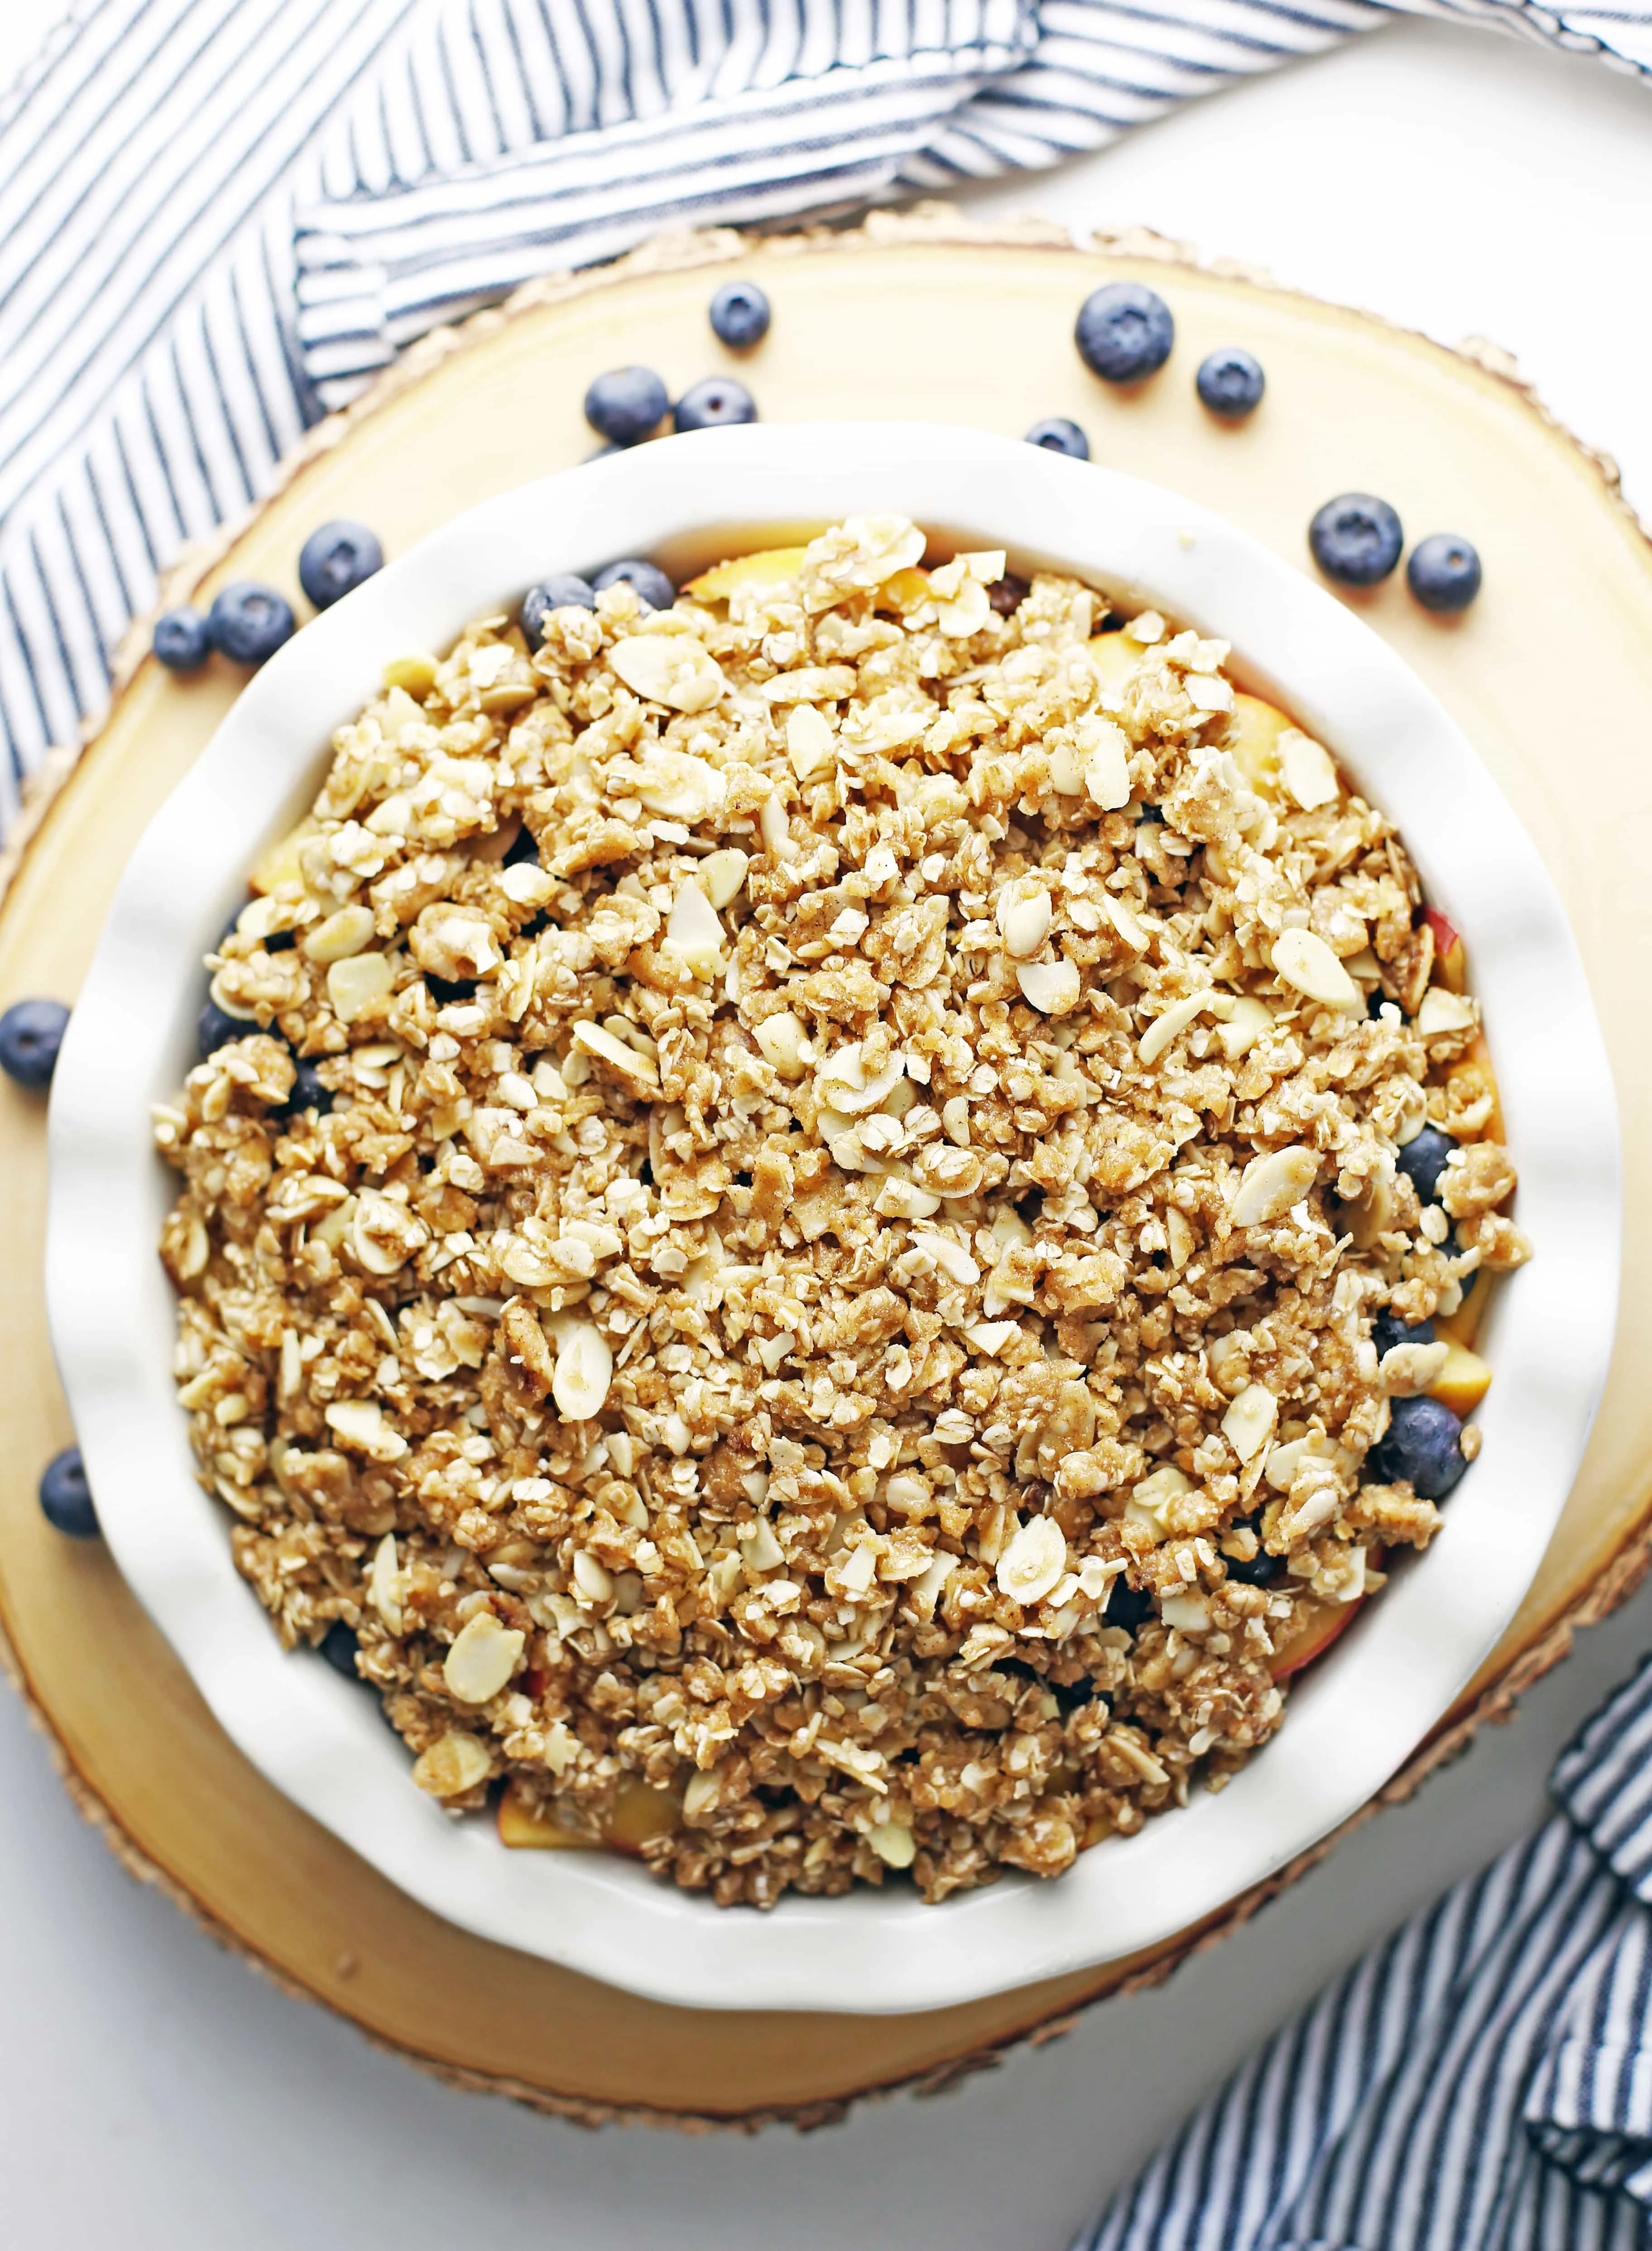 Unbaked peach blueberry crisp with almond oat topping in a round ceramic pie dish.